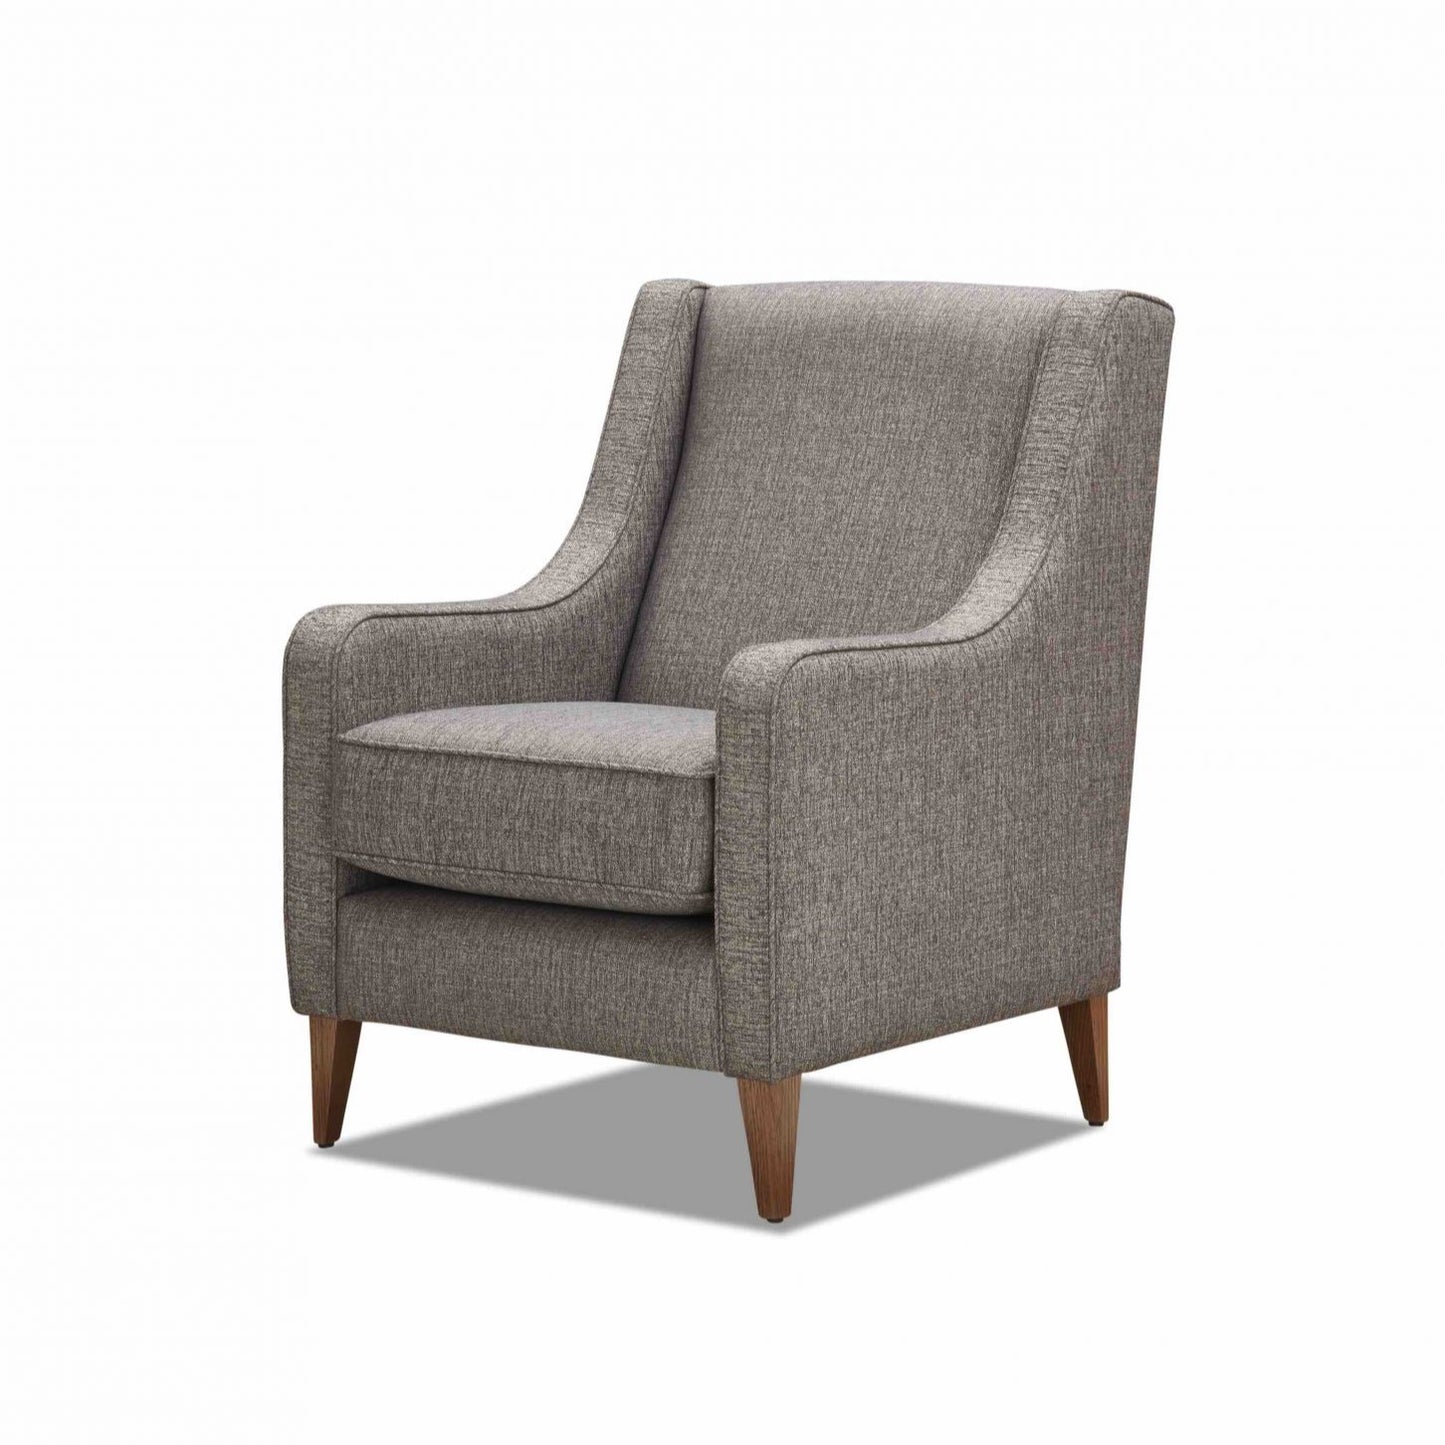 Gatwick Occasional Chair by Molmic available from Make Your House A Home, Furniture Store located in Bendigo, Victoria. Australian Made in Melbourne.